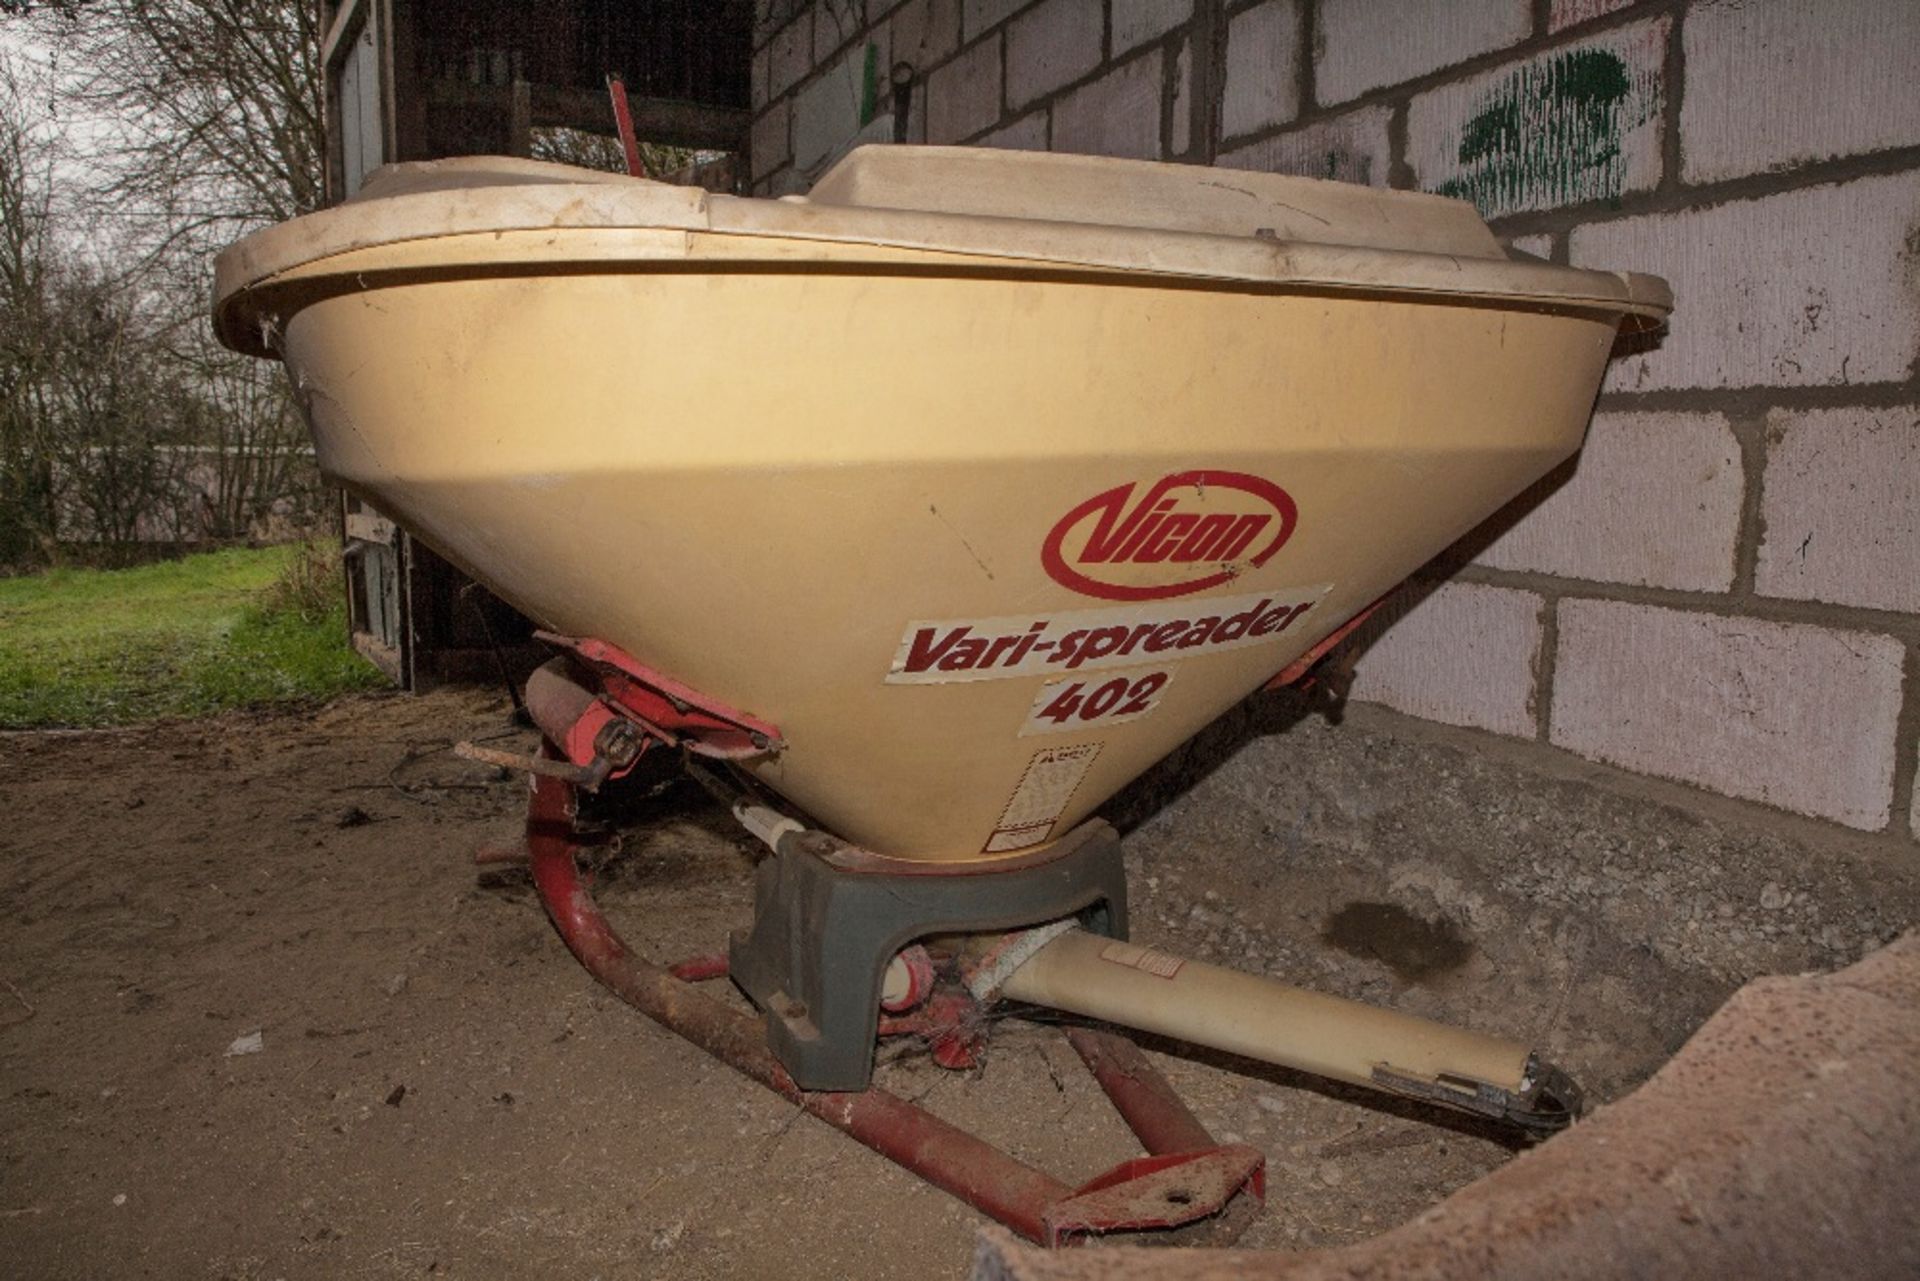 Vicon Vari-Spreader 402, Year - approx 1980, Purchased approx 1990 second-hand. - Image 3 of 3